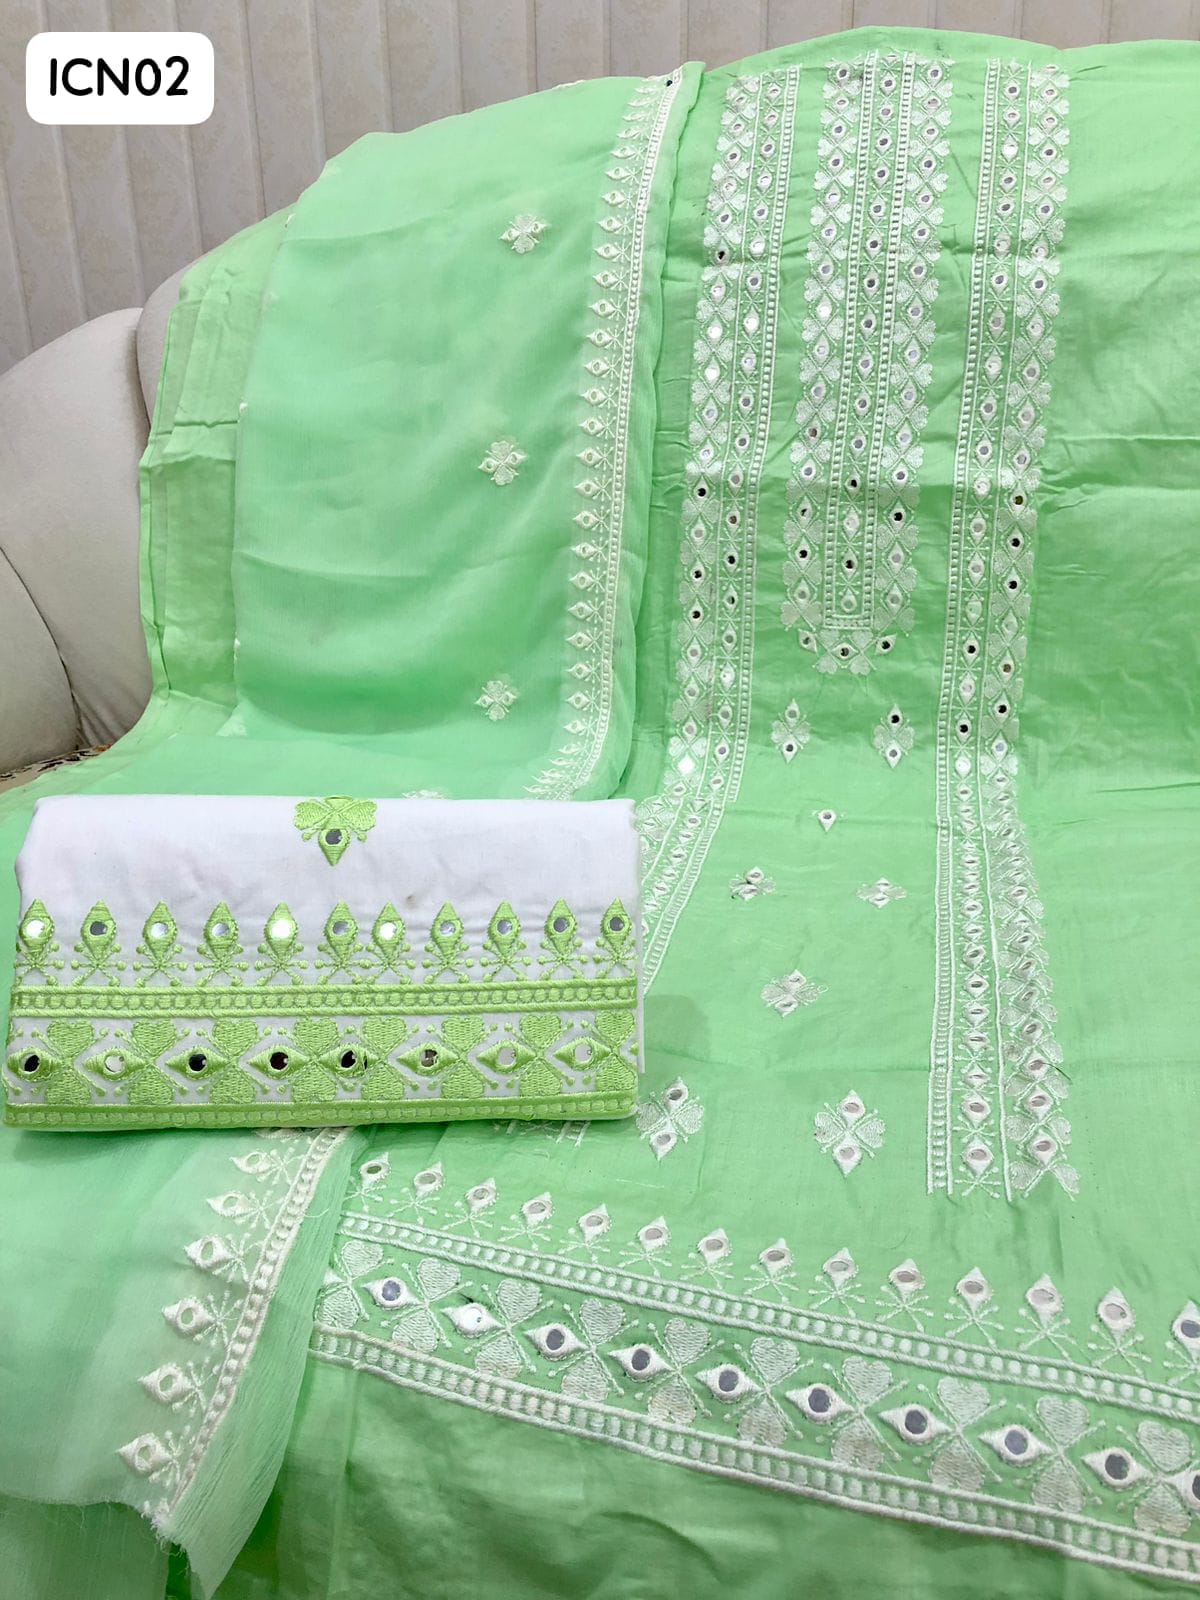 LAWN FABRIC COMPUTER CROSS STITCH EMBROIDERY WITH 9MM CHINA SHEESHA WORK SHIRT WITH EMBROIDERED CHIFFON DUPPATT AND LAWN CROSS STITCH EMBROIDERY TROUSER 3PC DRESS